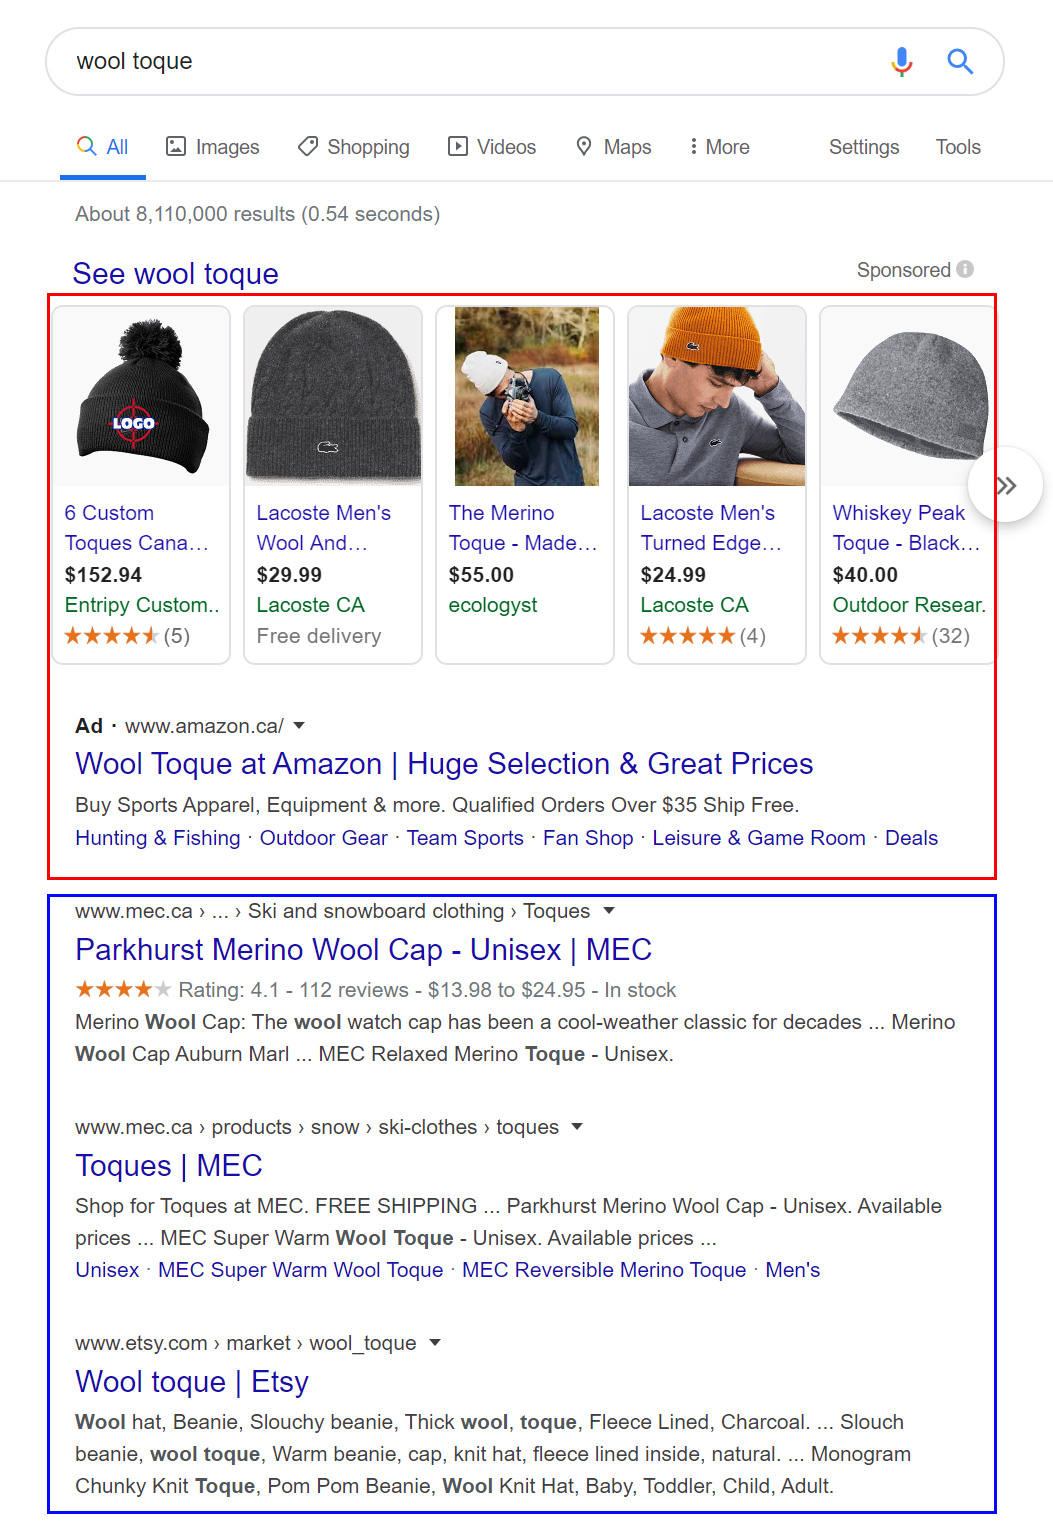 The difference between SEO and PPC in Google search results